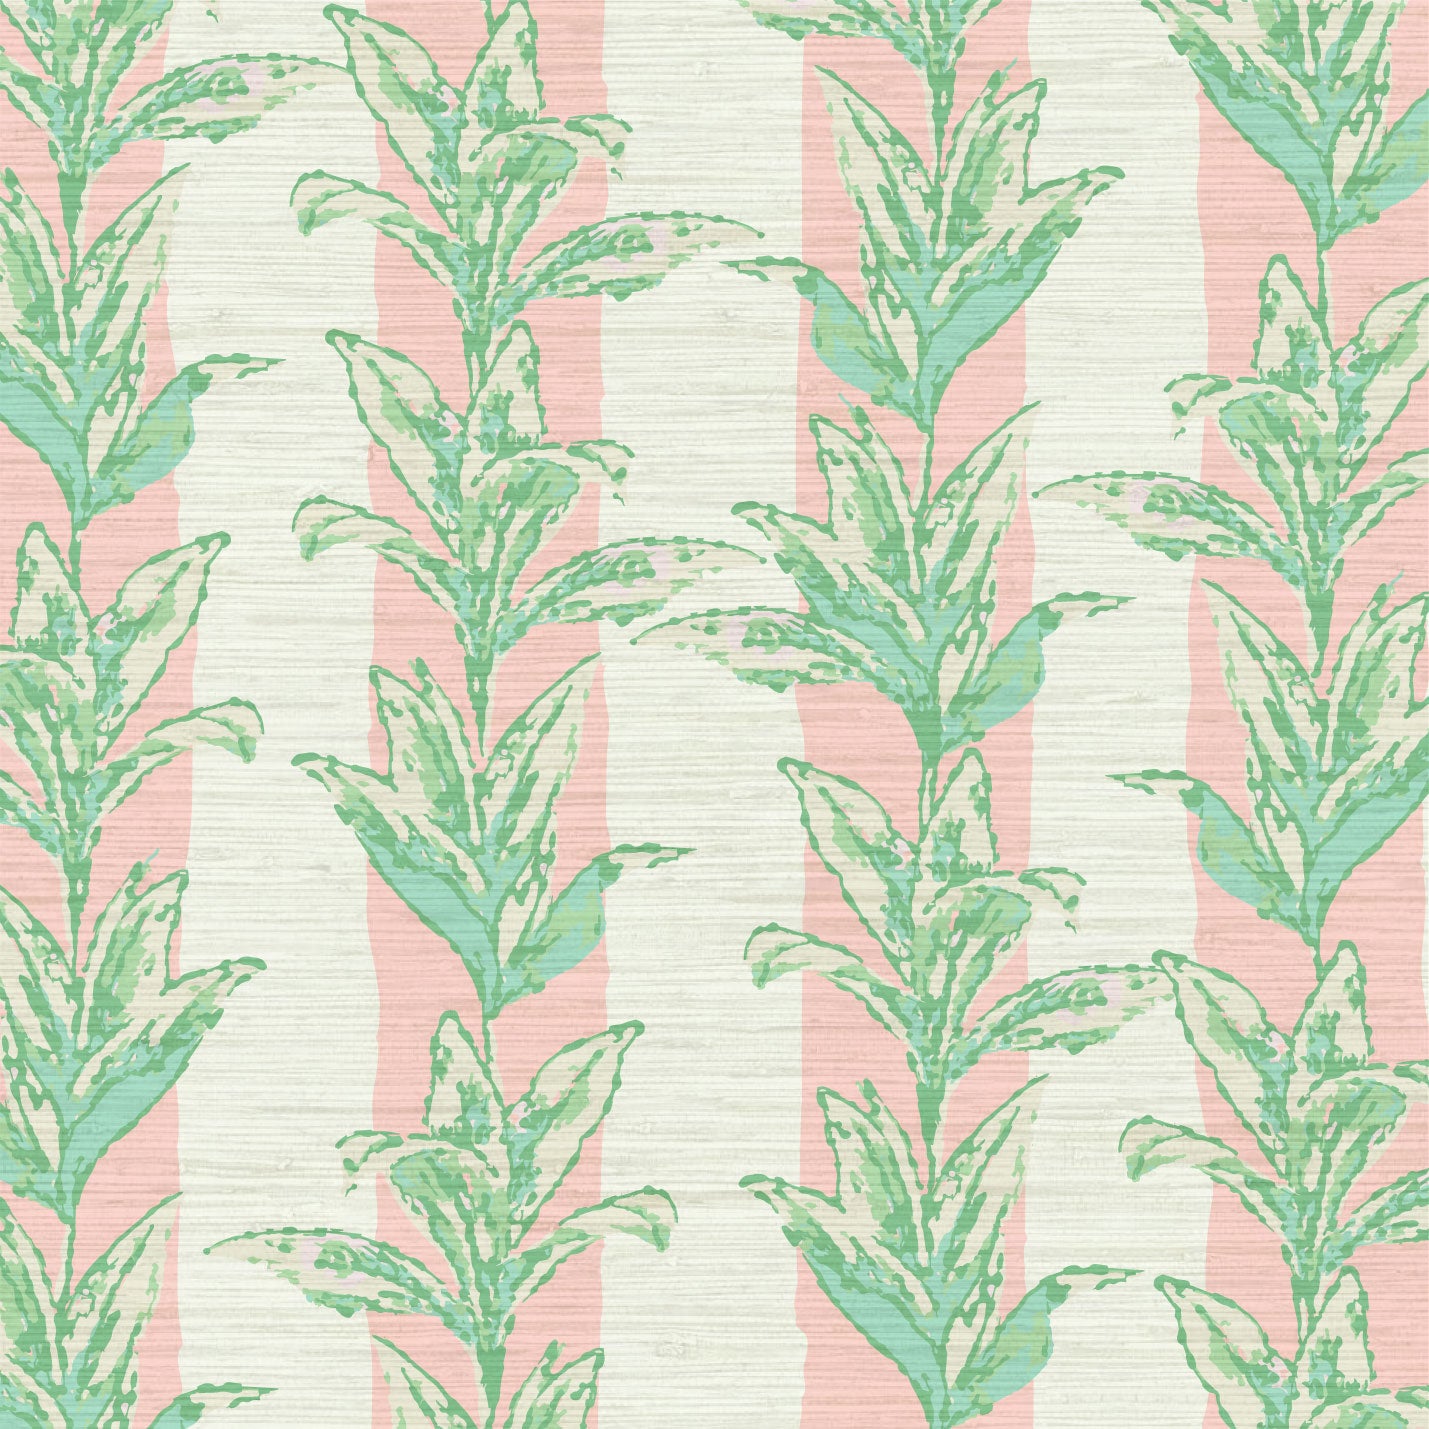 printed grasscloth with light pink and white vertical cabana stripes overlayed with light green and aqua shades of palm leaves also arranged in a vertical stripe cascading down the wallpaper  Natural Textured Eco-Friendly Non-toxic High-quality  Sustainable Interior Design Bold Custom Tailor-made Retro chic Tropical Jungle Coastal Garden Seaside Coastal Seashore Waterfront Vacation home styling Retreat Relaxed beach vibes Beach cottage Shoreline Oceanfront Nautical Cabana preppy palm leaf